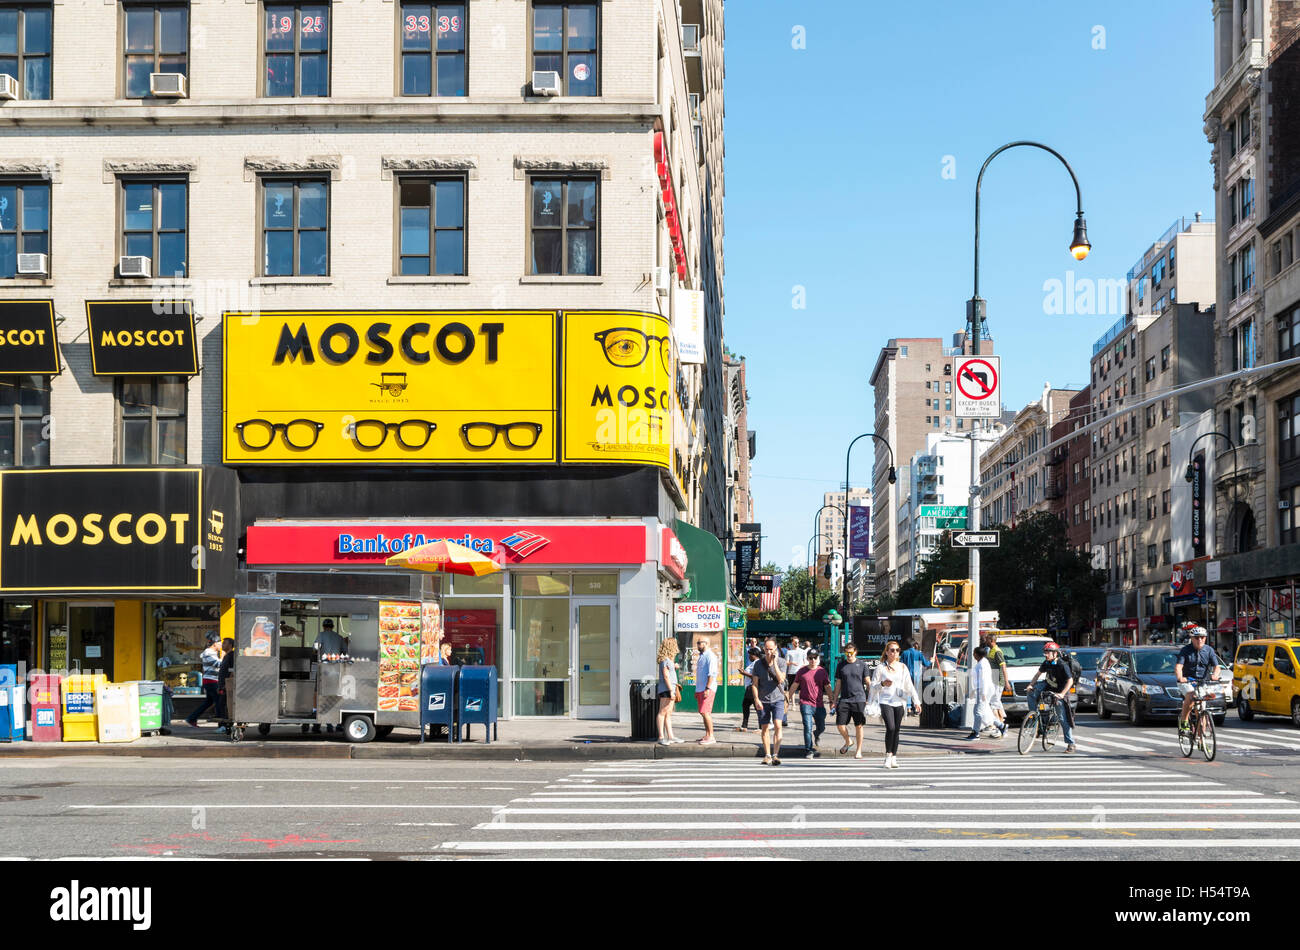 View of intersection of 14th Street with 6th Avenue, with Moscot eyeglasses store and people crossing the road Stock Photo